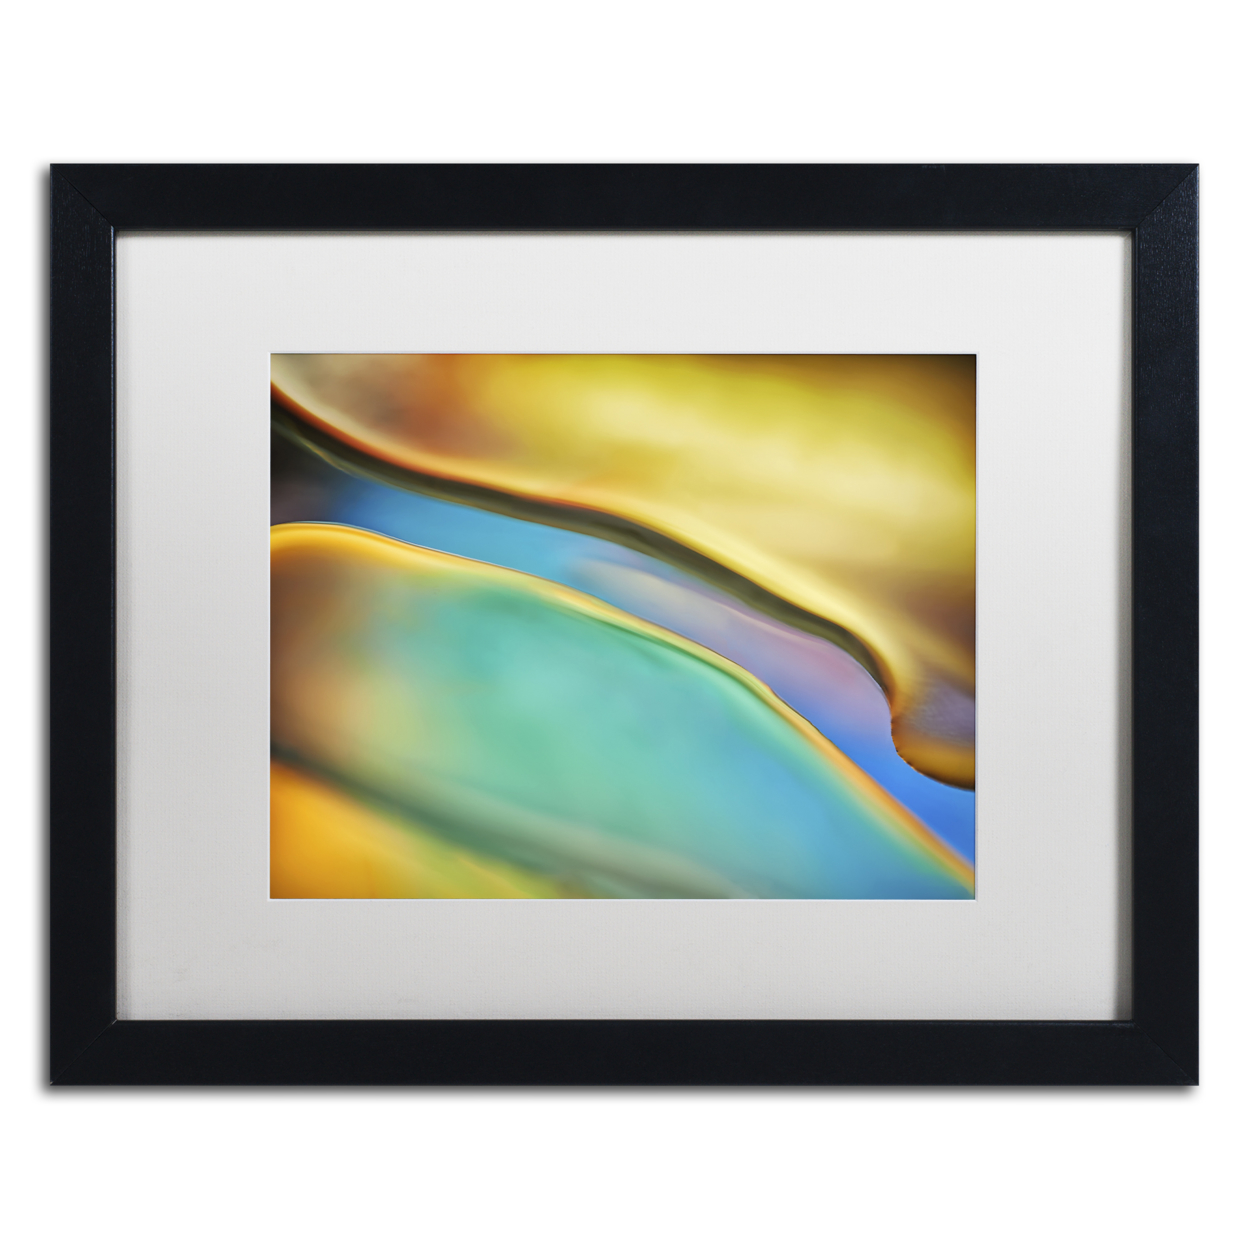 Cora Niele 'Yellow And Aqua Blue Flow' Black Wooden Framed Art 18 X 22 Inches